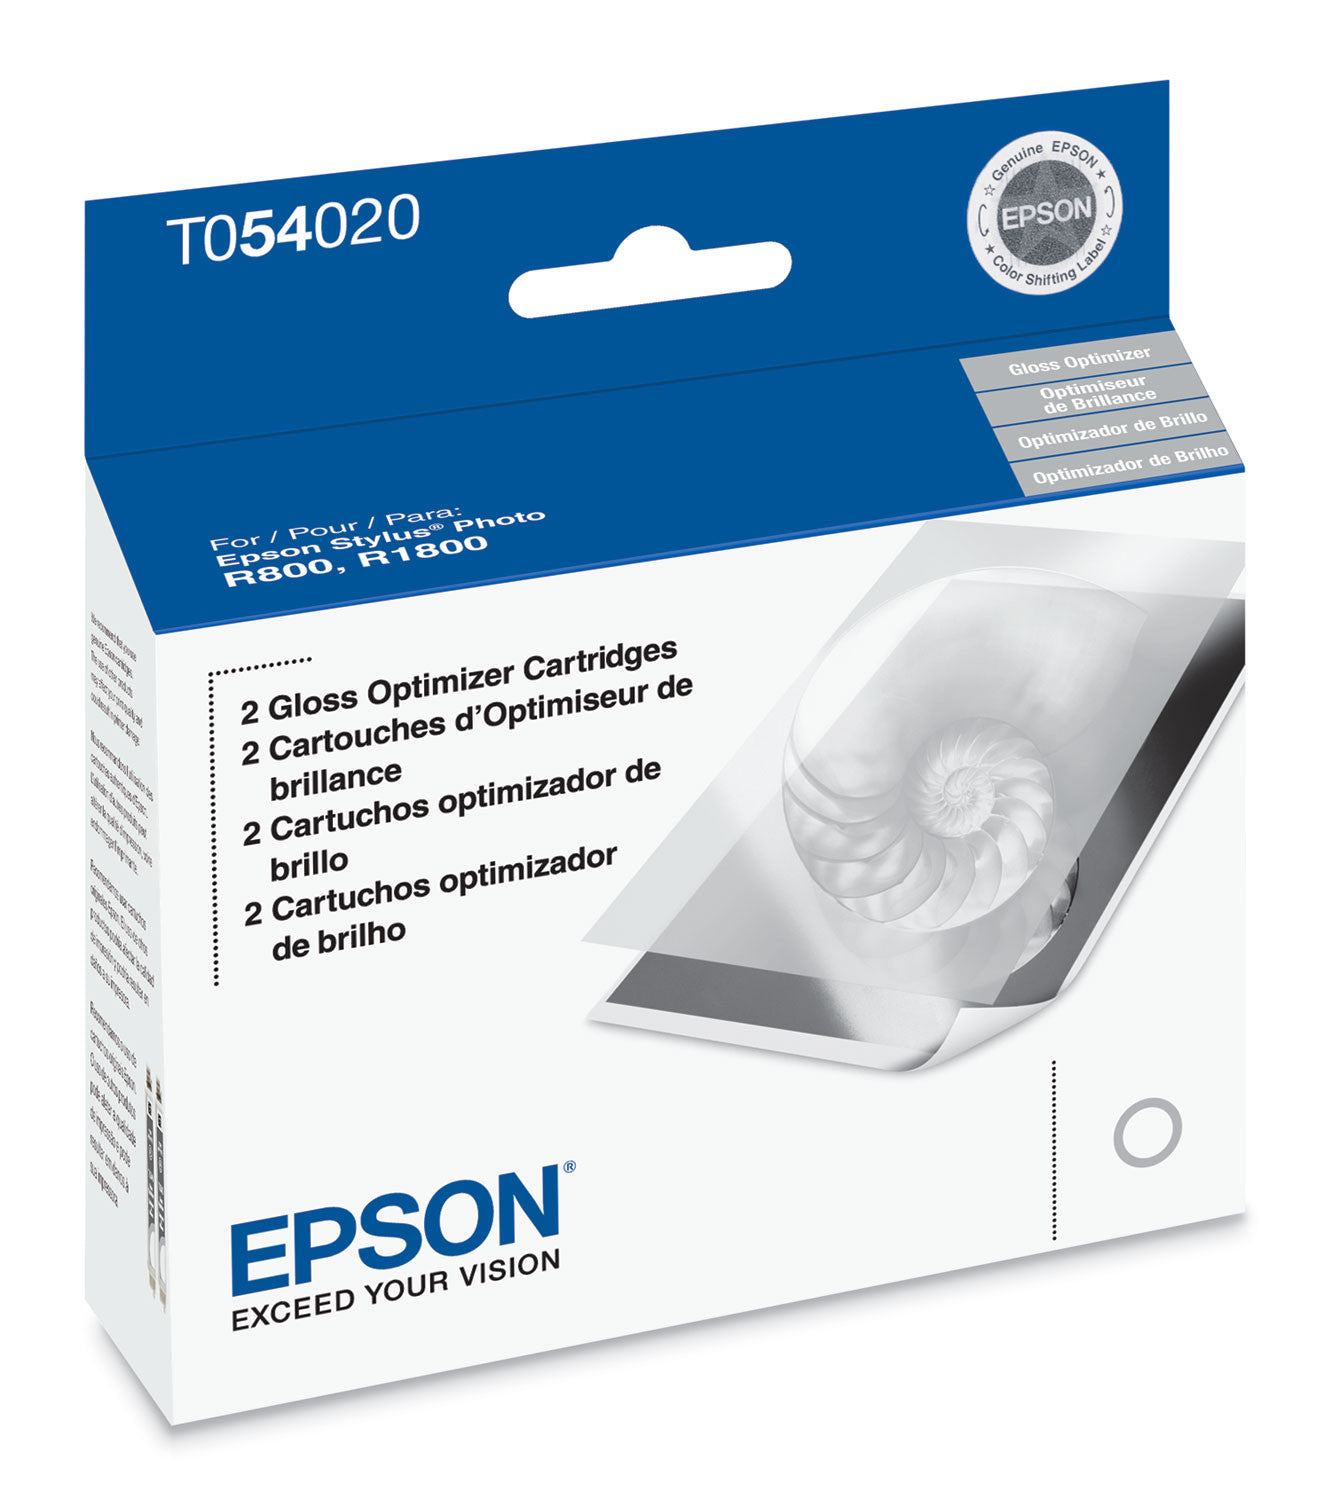 Epson T054020 R800/R1800 Gloss Optimizer Ink, printers ink small format, Epson - Pictureline  - 1